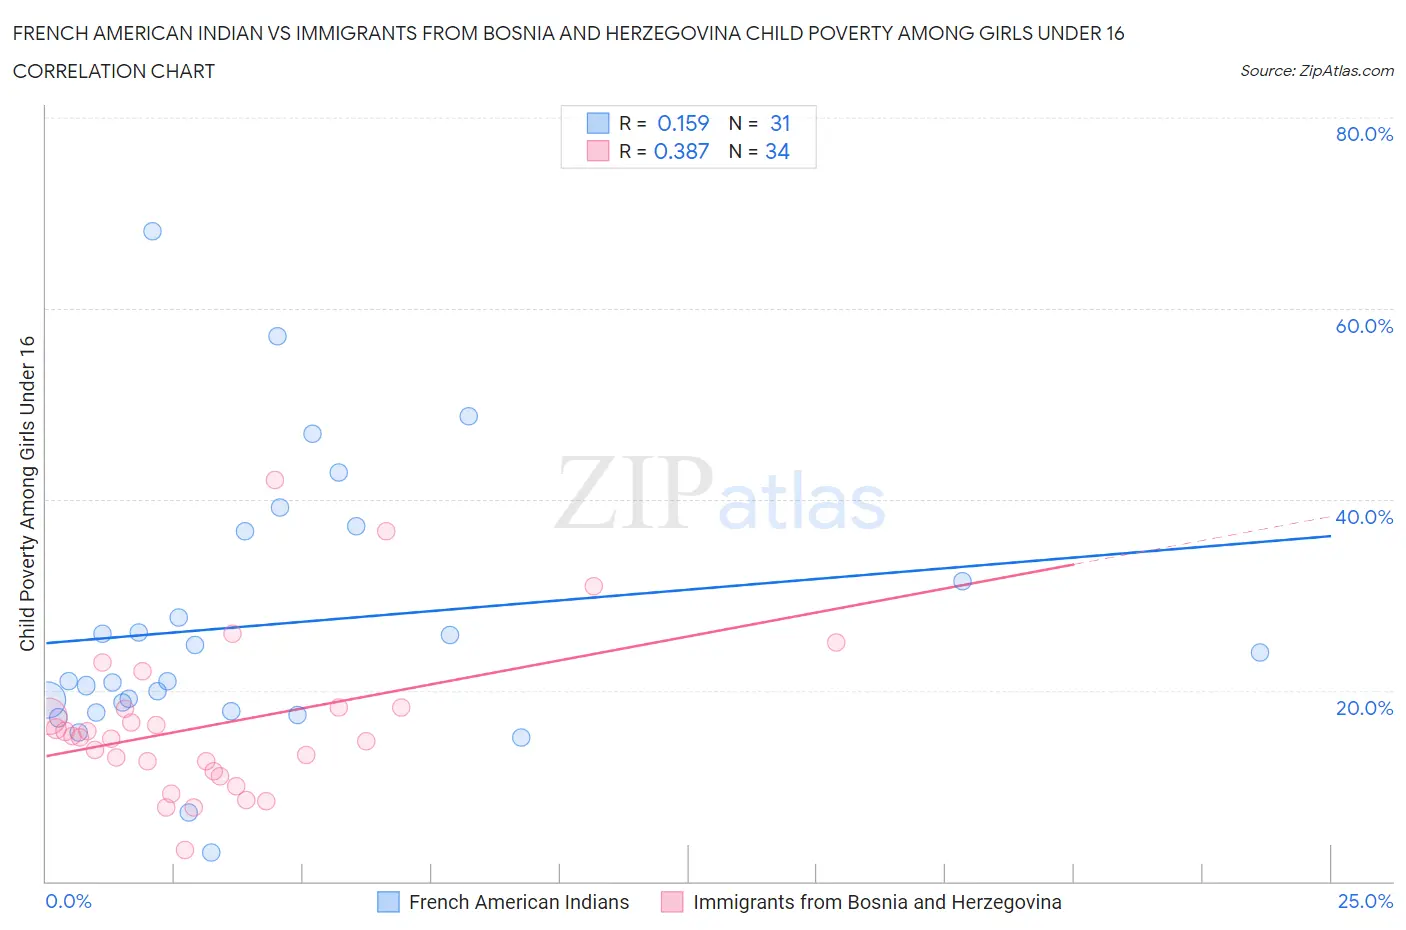 French American Indian vs Immigrants from Bosnia and Herzegovina Child Poverty Among Girls Under 16